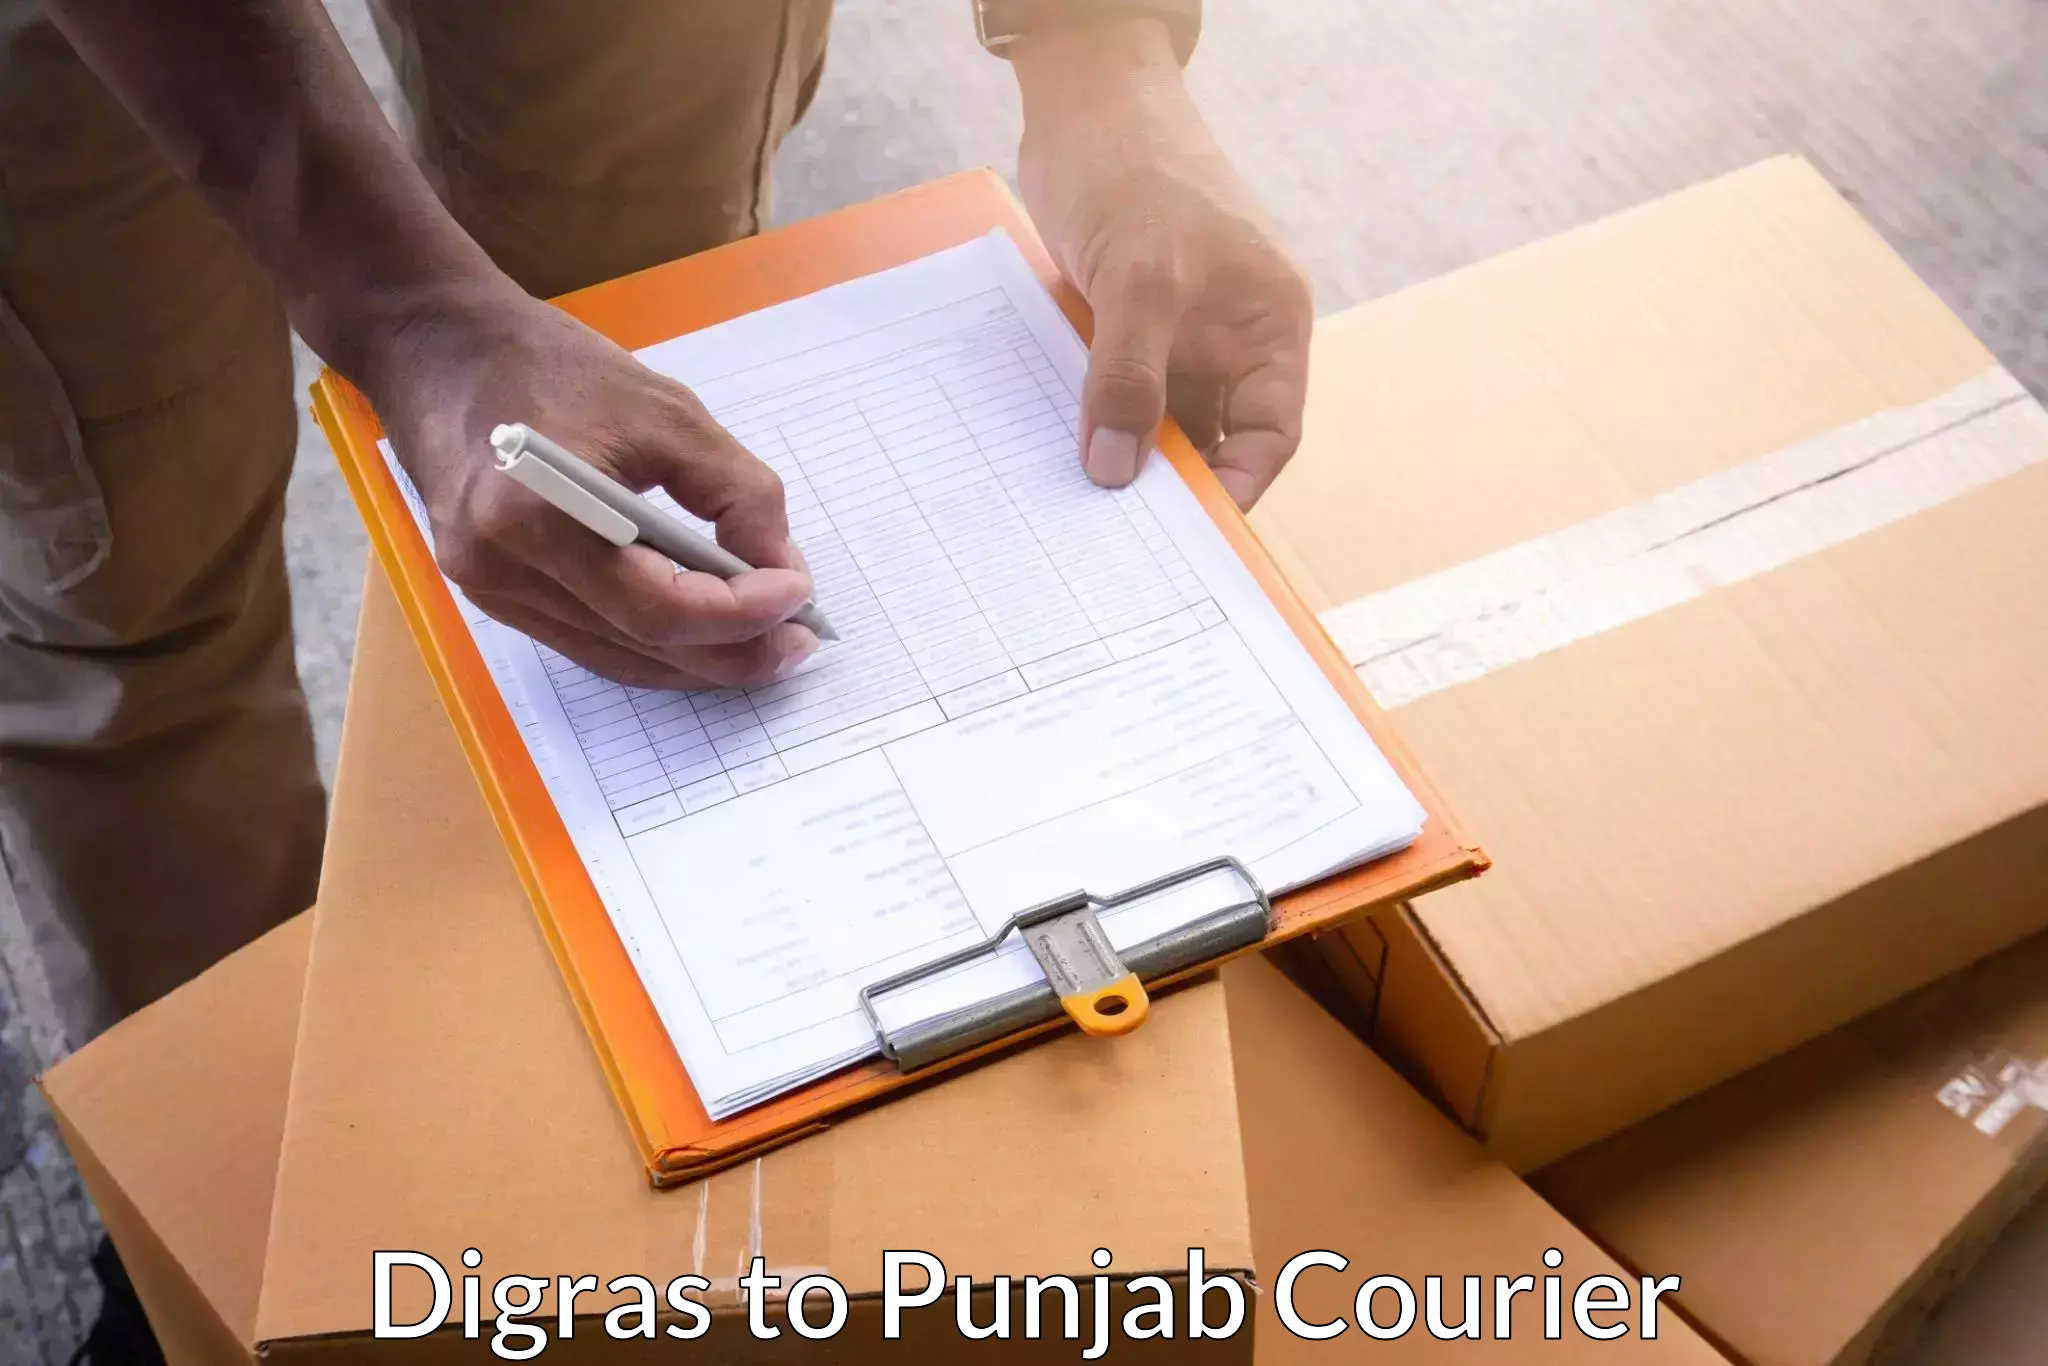 Multi-service courier options Digras to Punjab